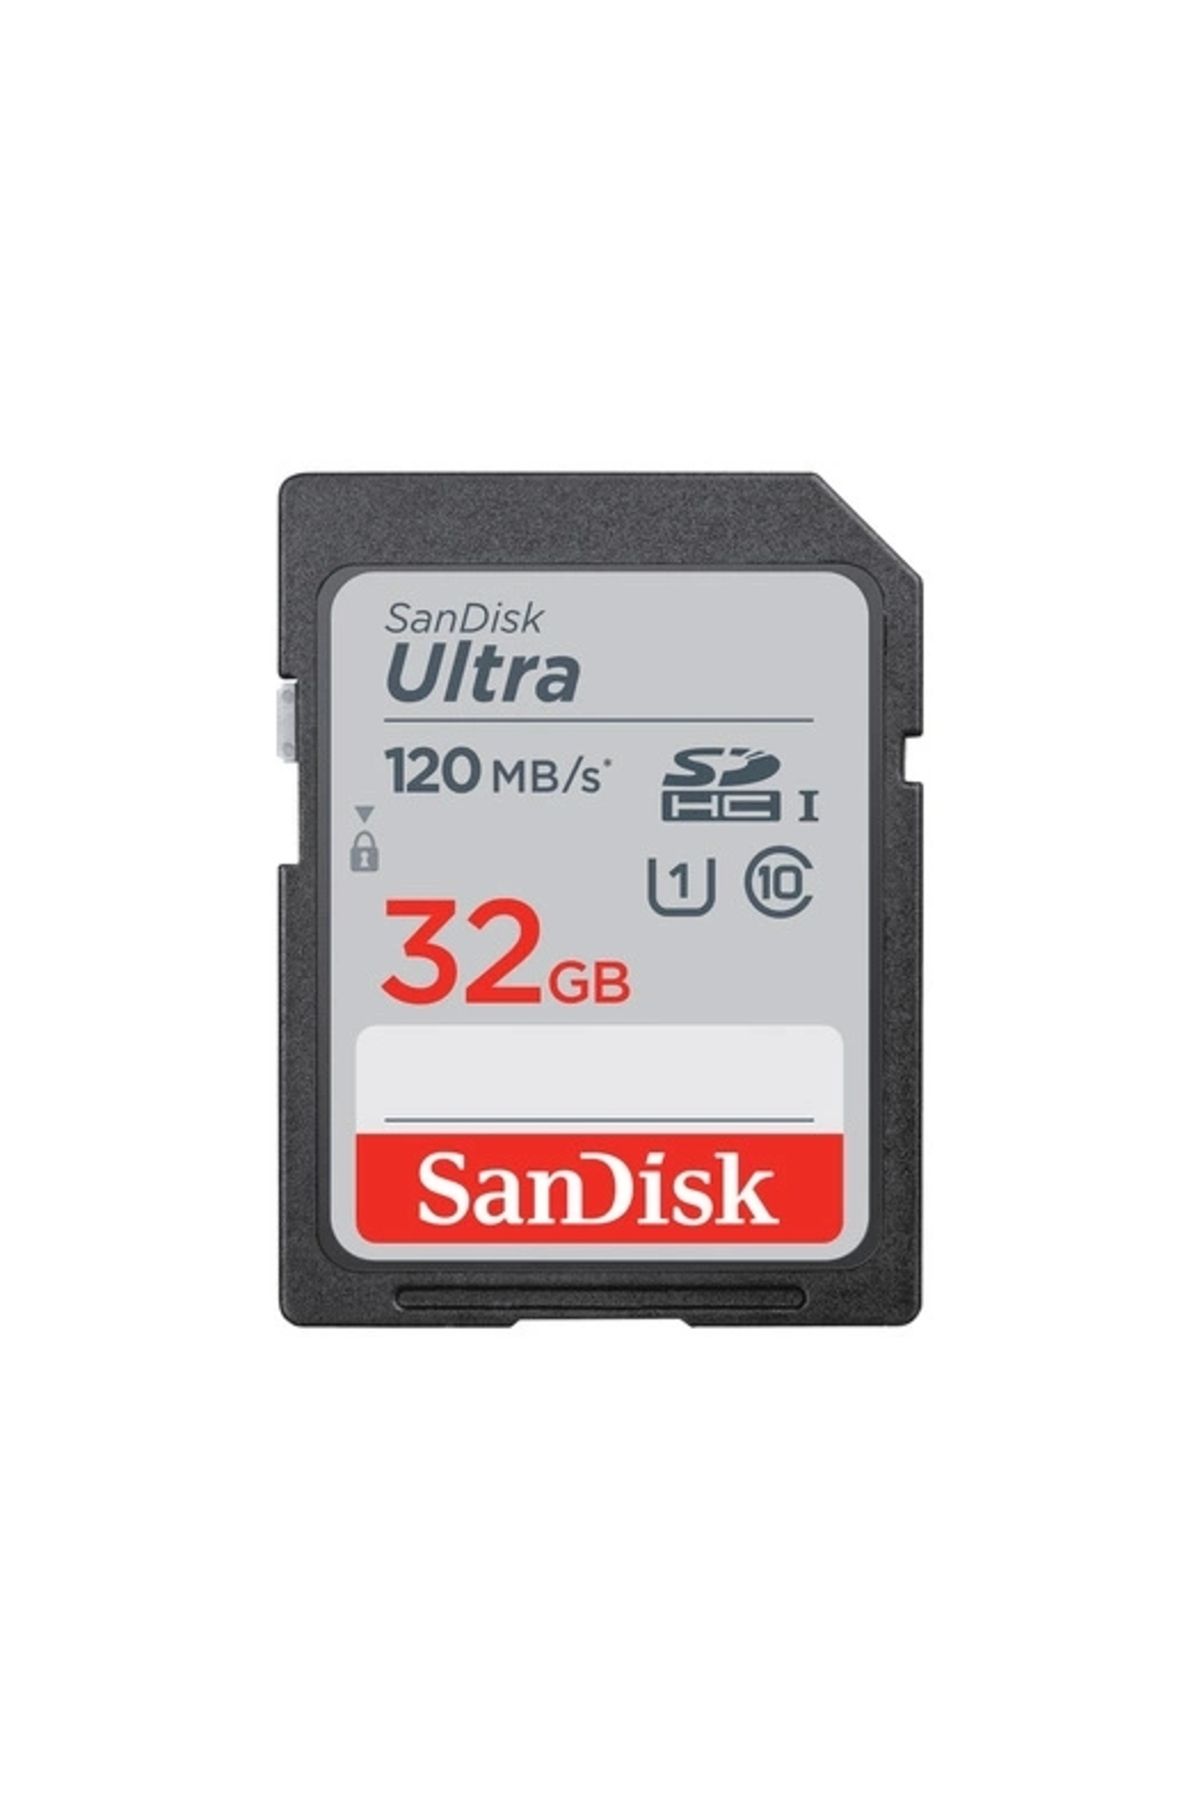 Sandisk Ultra 32GB SDHC Memory Card 120MB/s